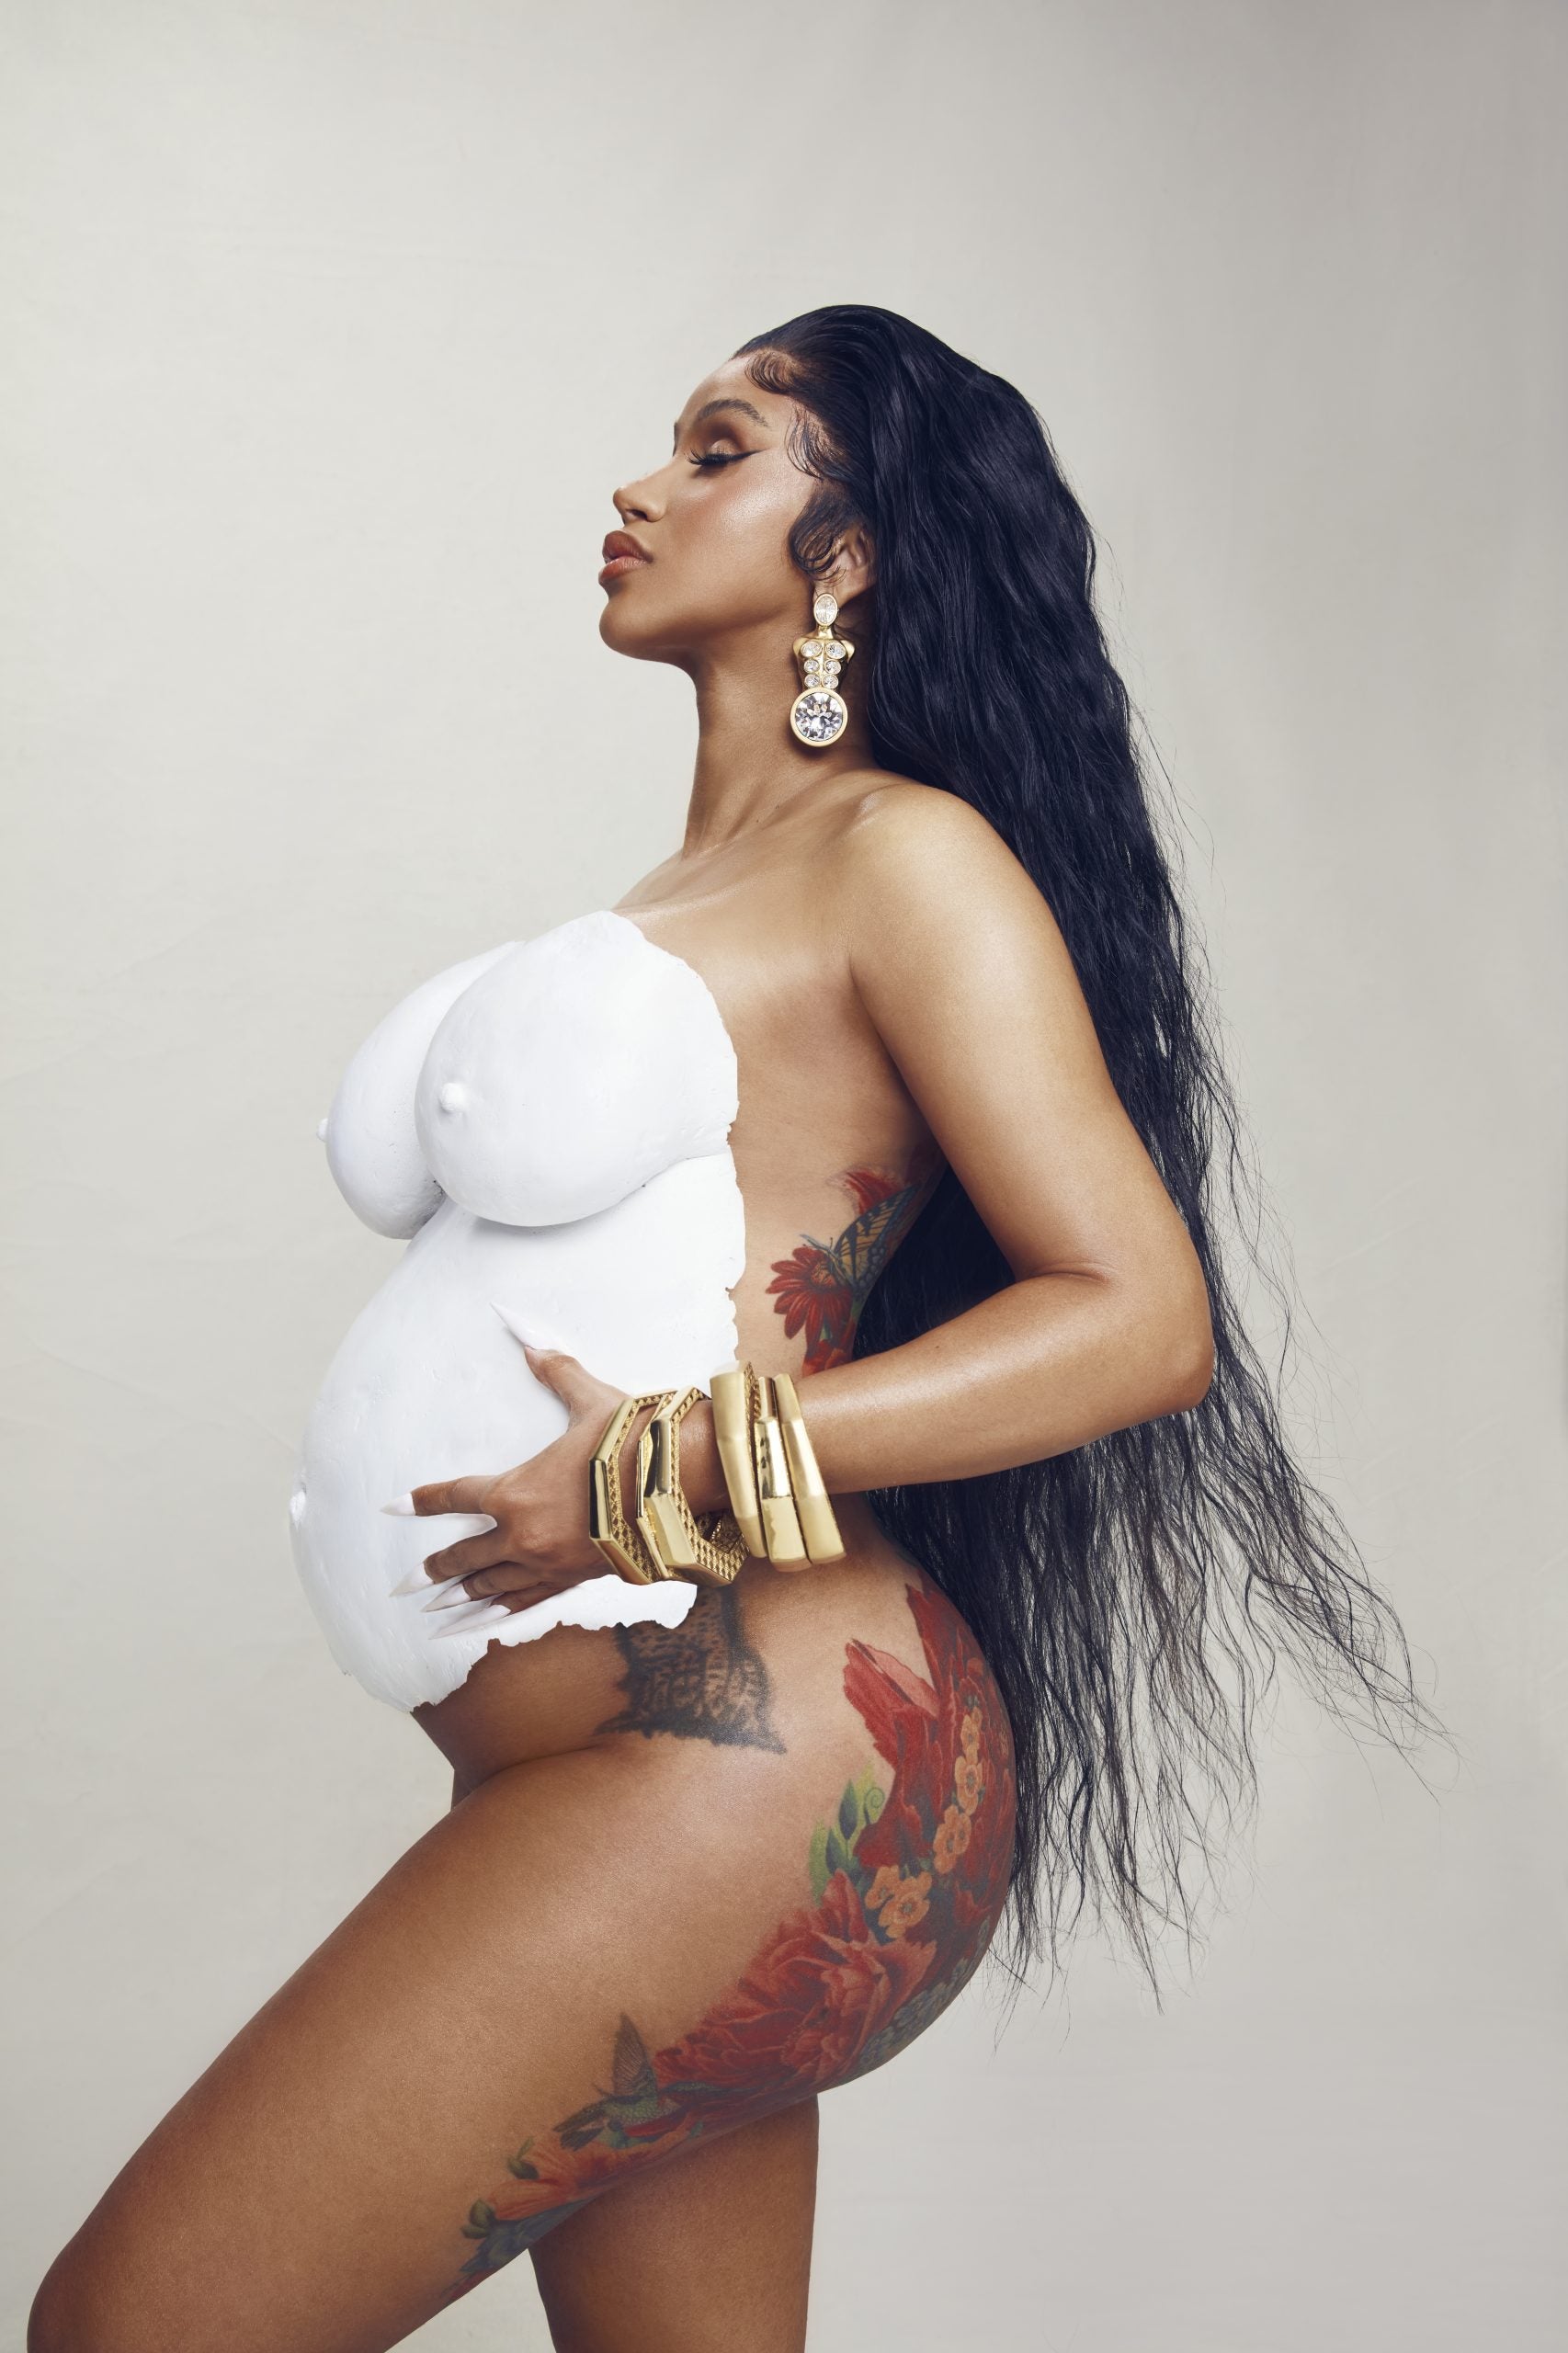 Cardi B Is Expecting Baby No. 2 With Husband Offset